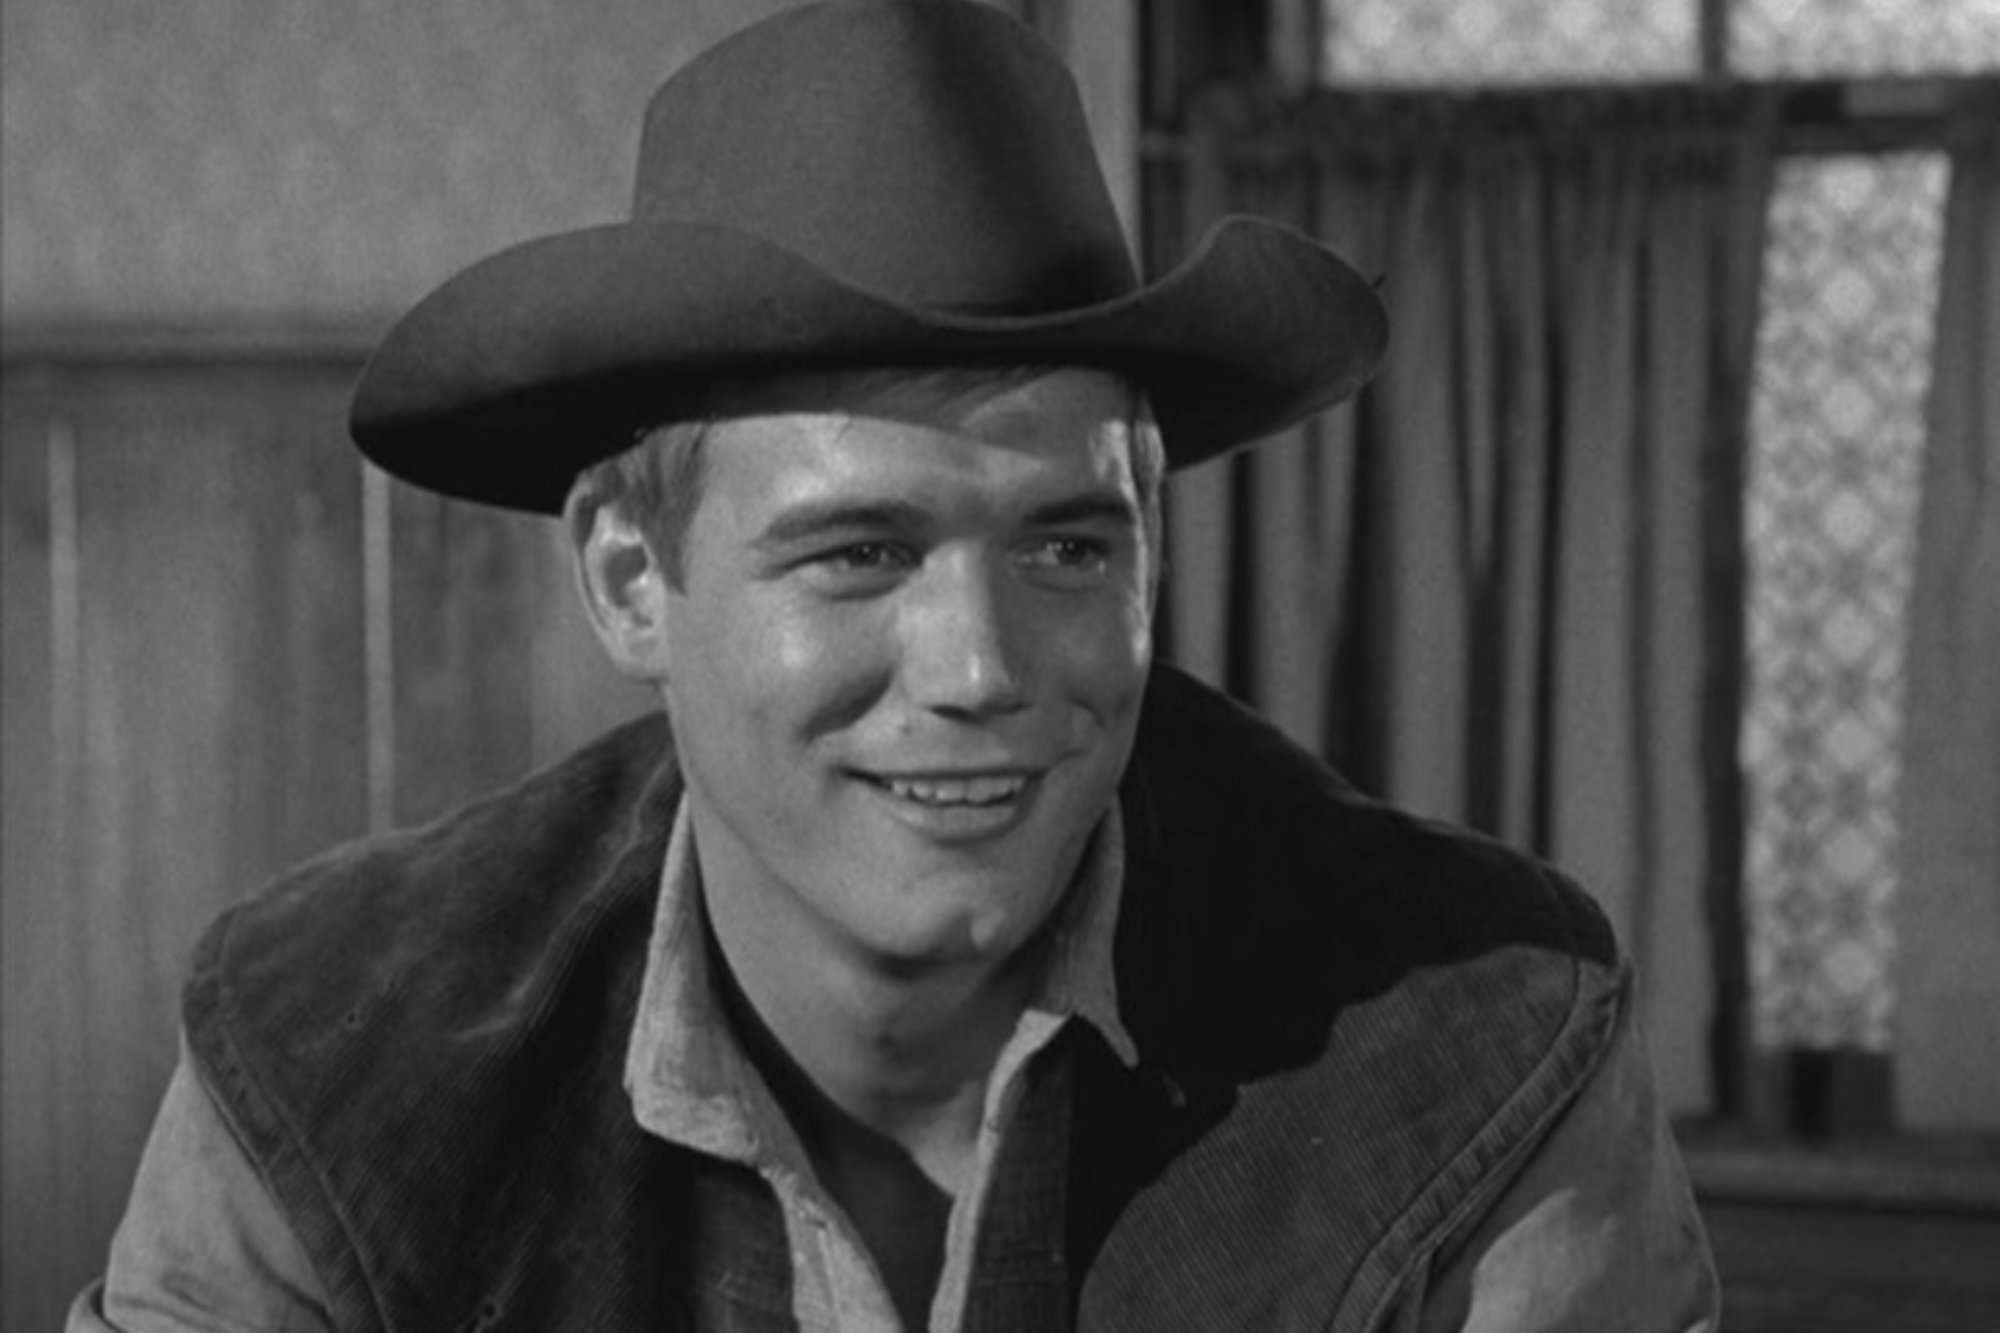 'Gunsmoke' Roger Ewing as Thad Greenwood in a black-and-white picture wearing a cowboy hat, vest, and collared shirt. He's smiling in the picture.